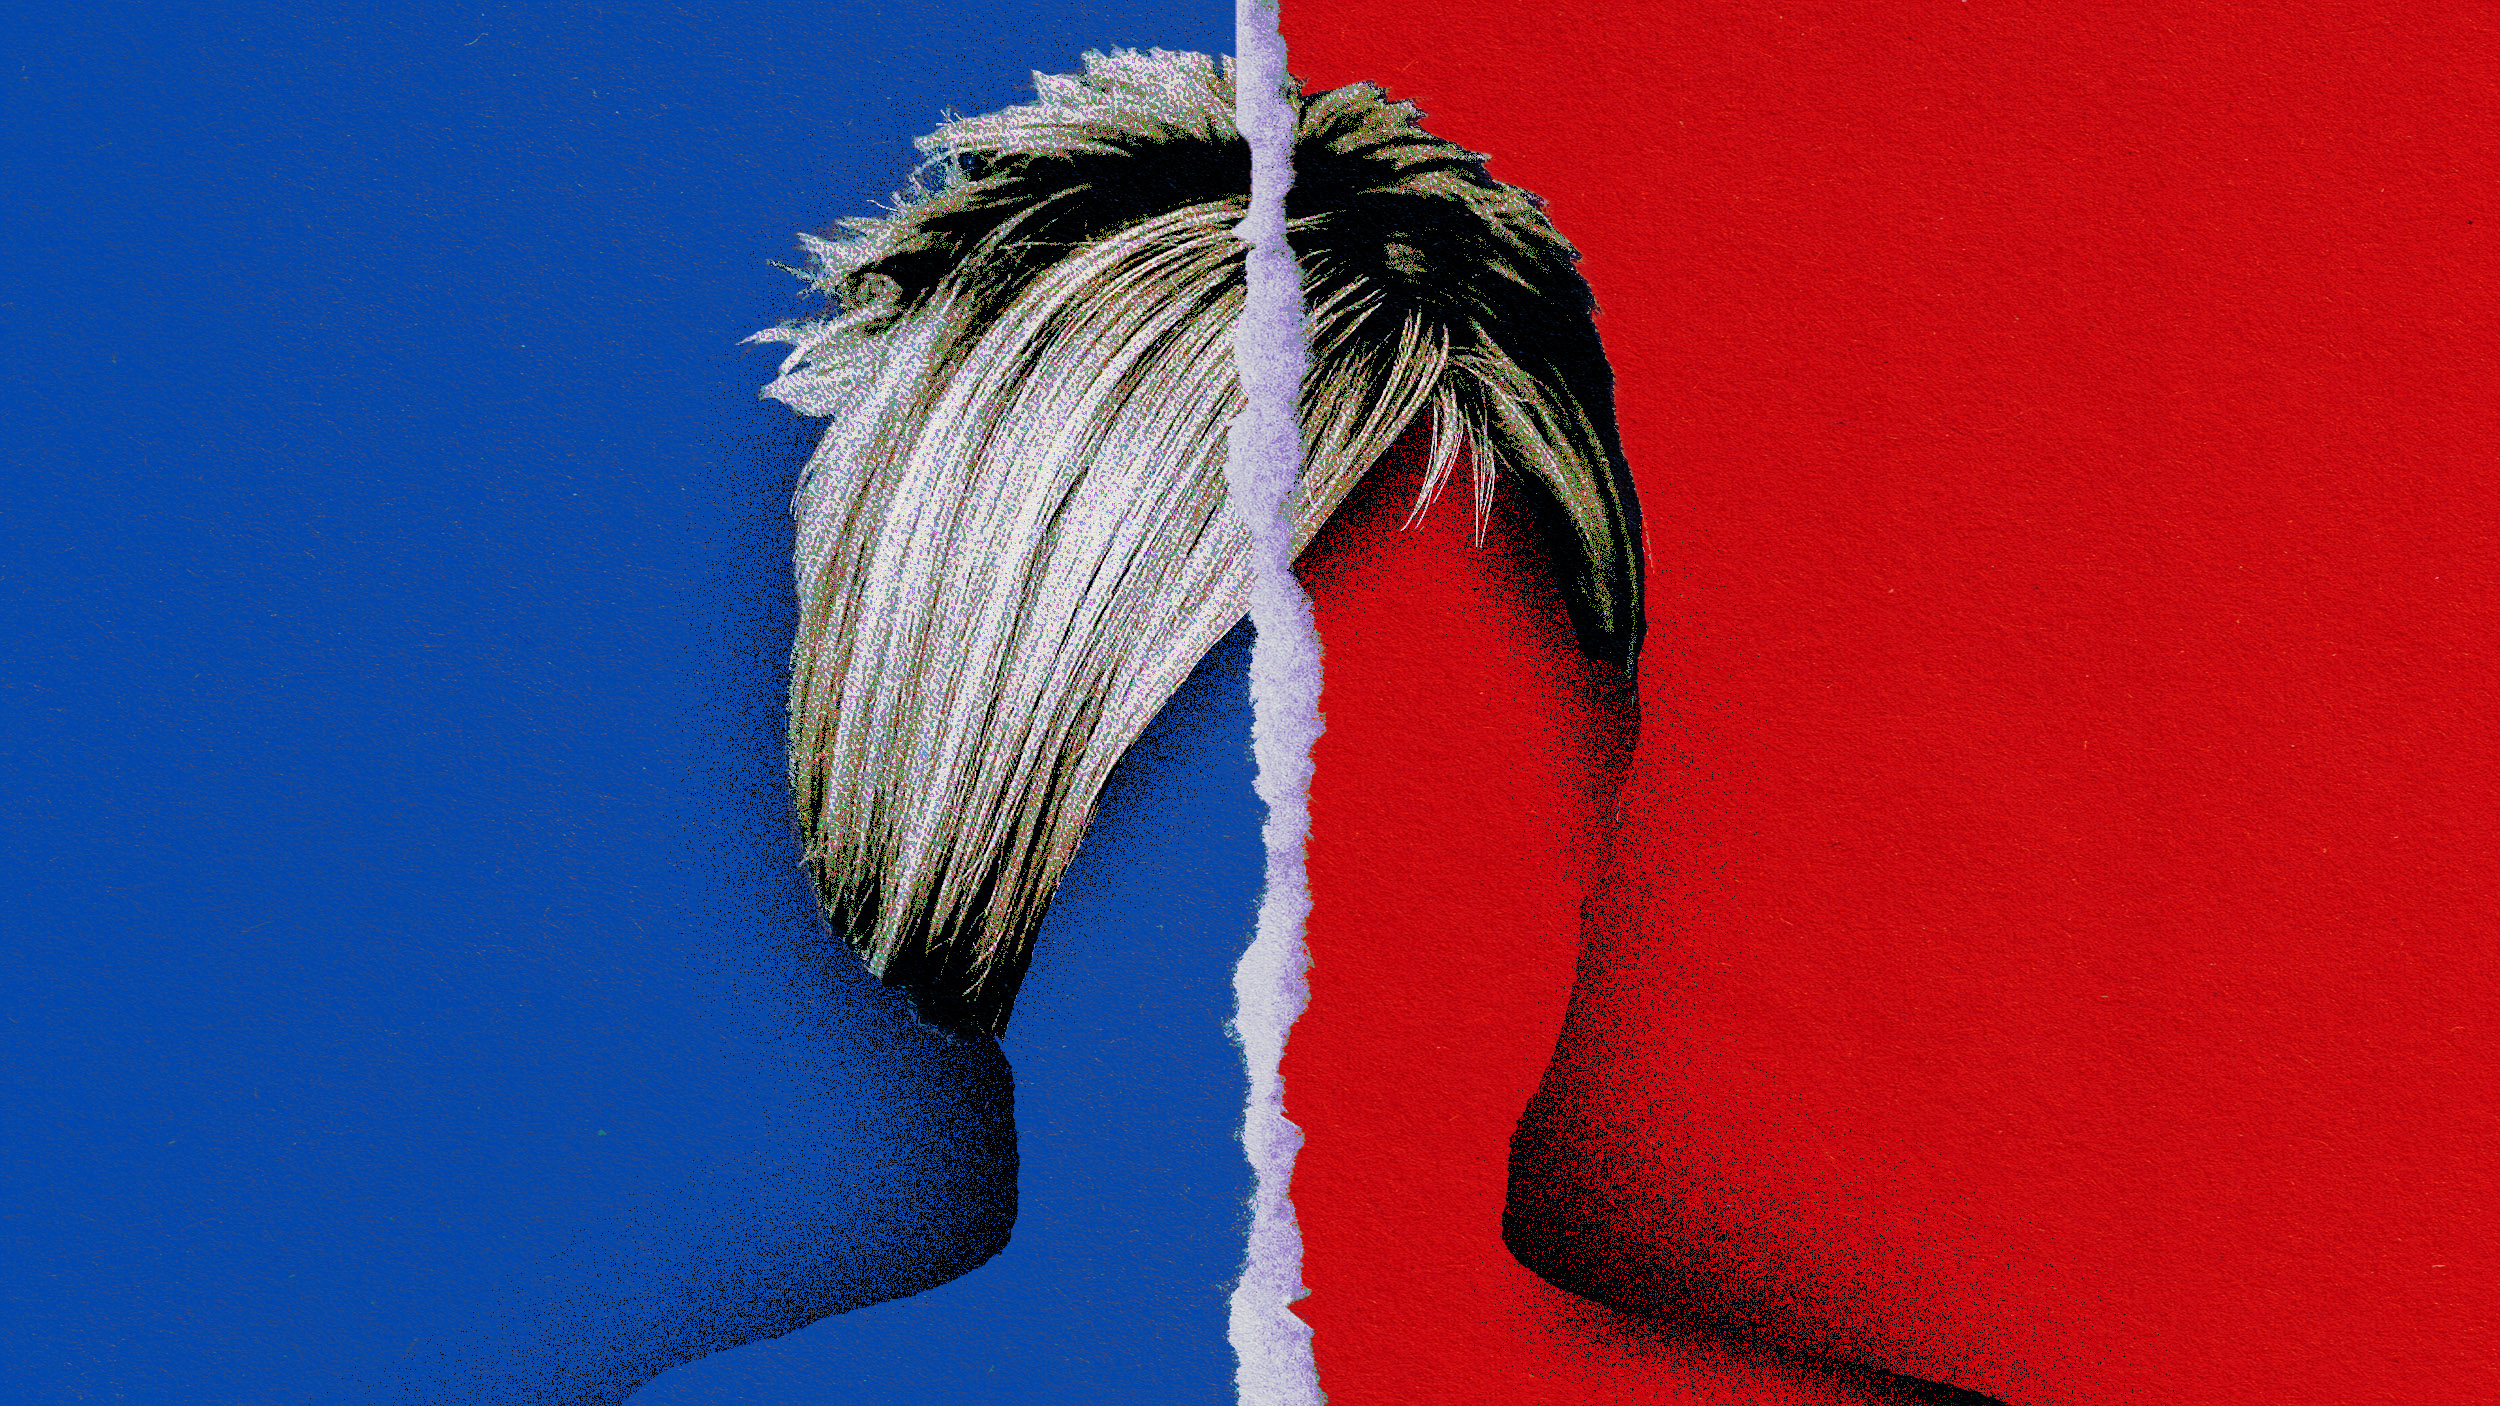 A woman's head is cut in half, eliciting diverse thoughts with a blue and red background.